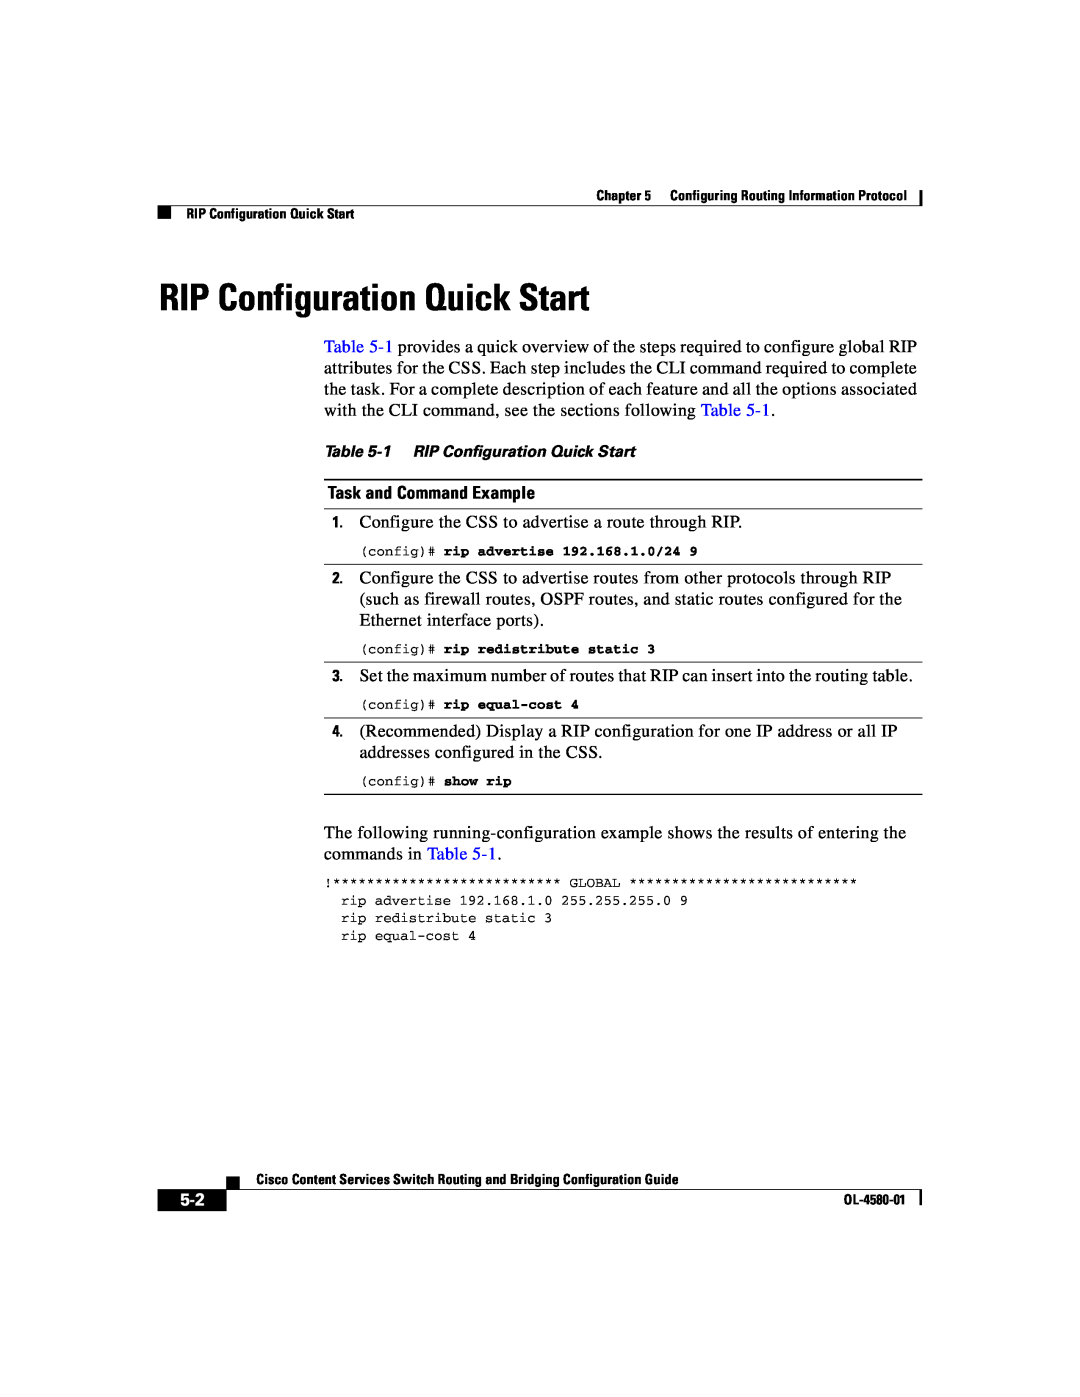 Cisco Systems OL-4580-01 manual Task and Command Example, 1 RIP Configuration Quick Start 